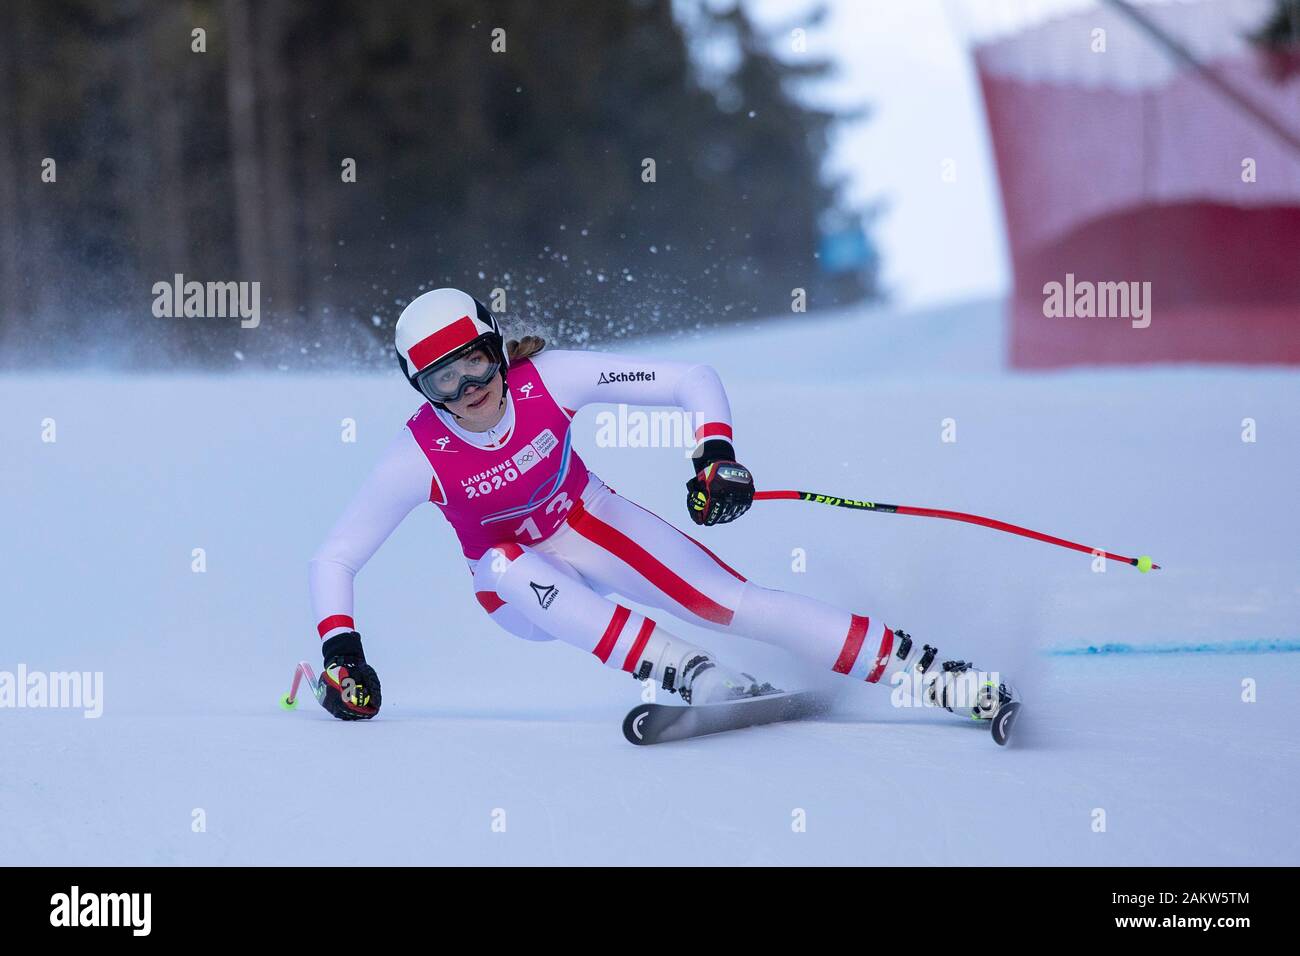 Alpine skier, Maria Niederndorfer, AUT, competes in the Lausanne 2020 Women's Super G Downhill Skiing At Les Diablerets Alpine Centre In Switzerland Stock Photo